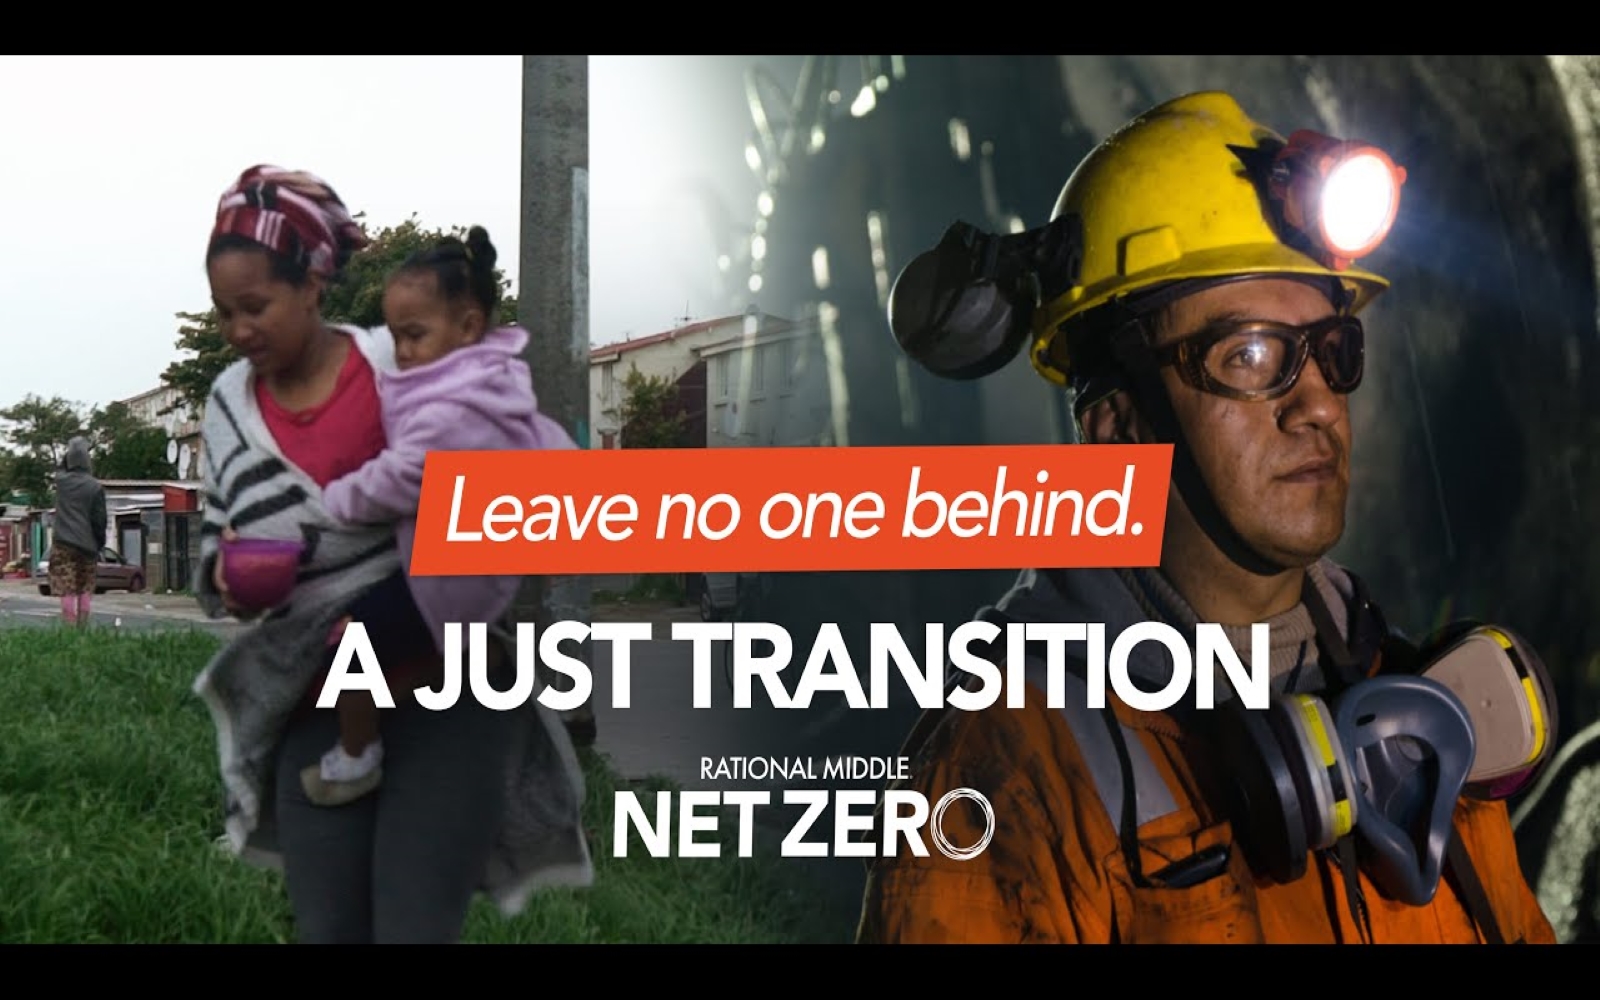 Photo of a mother and daughter and of an energy worker with text superimposed: leave no one behind, a just transition. Rational Middle Net Zero.